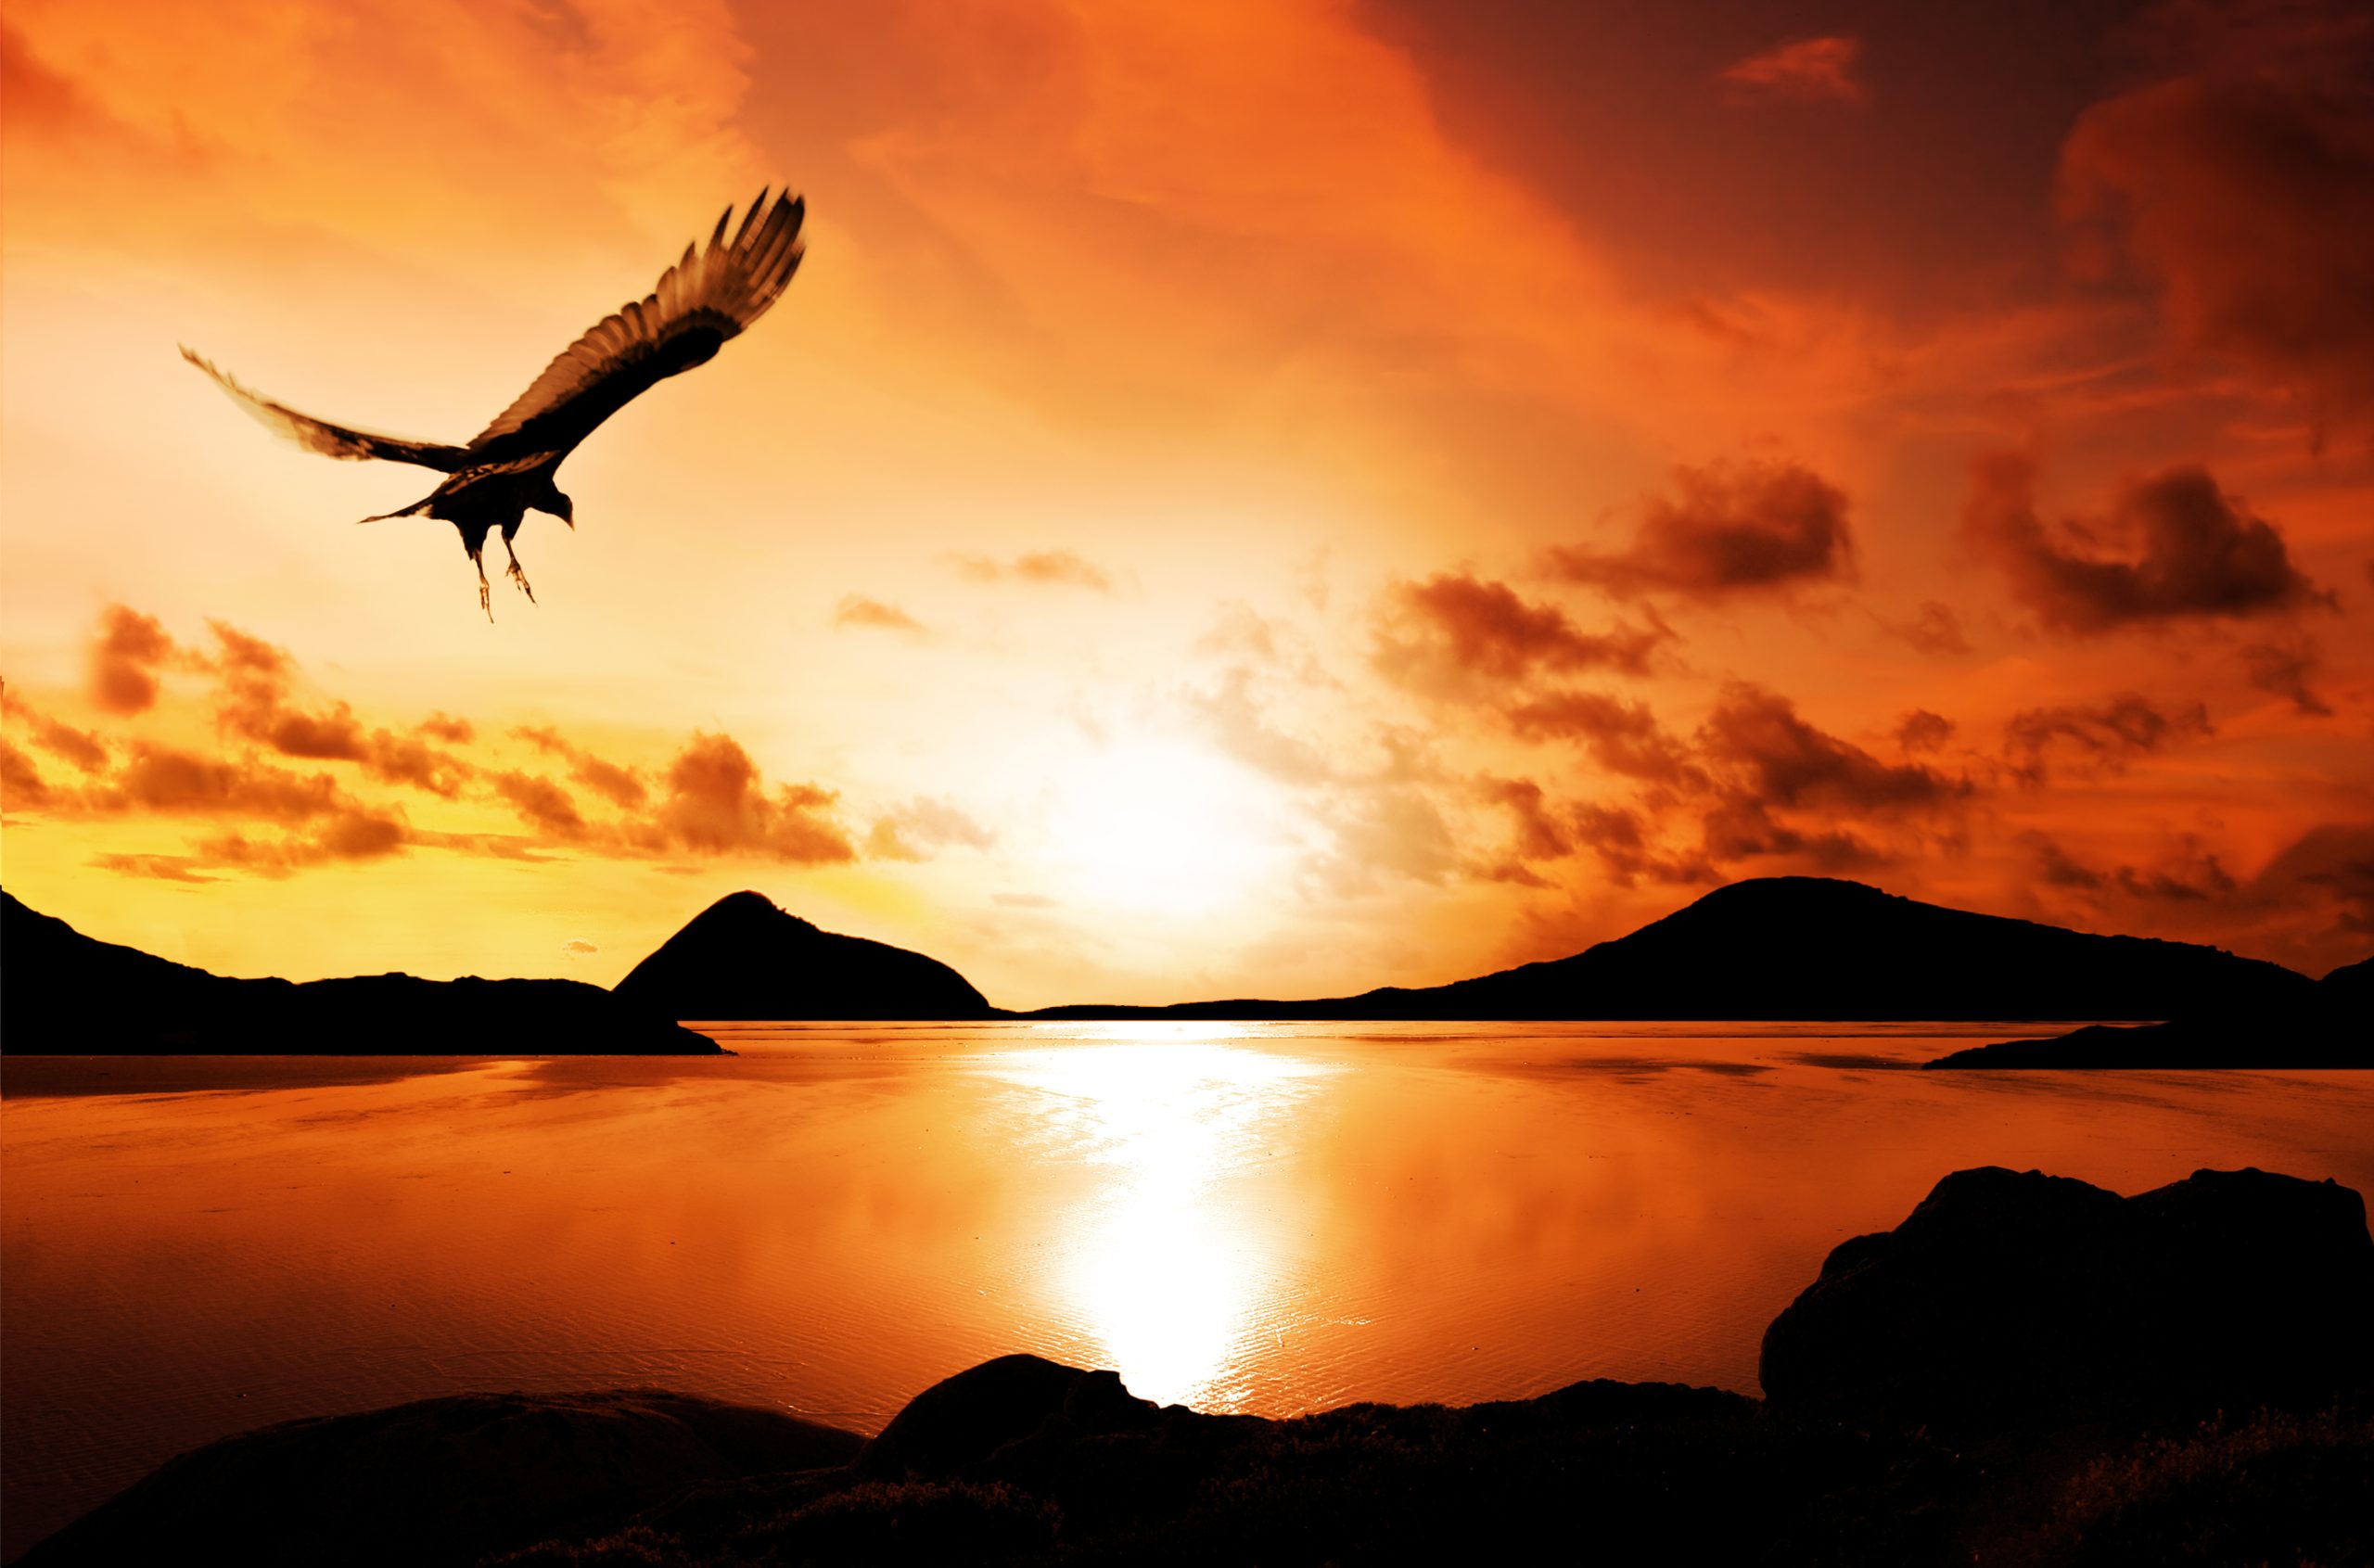 Soaring eagle against a beautiful sunset. This is showing the importance of a great visual as part of your video strategies